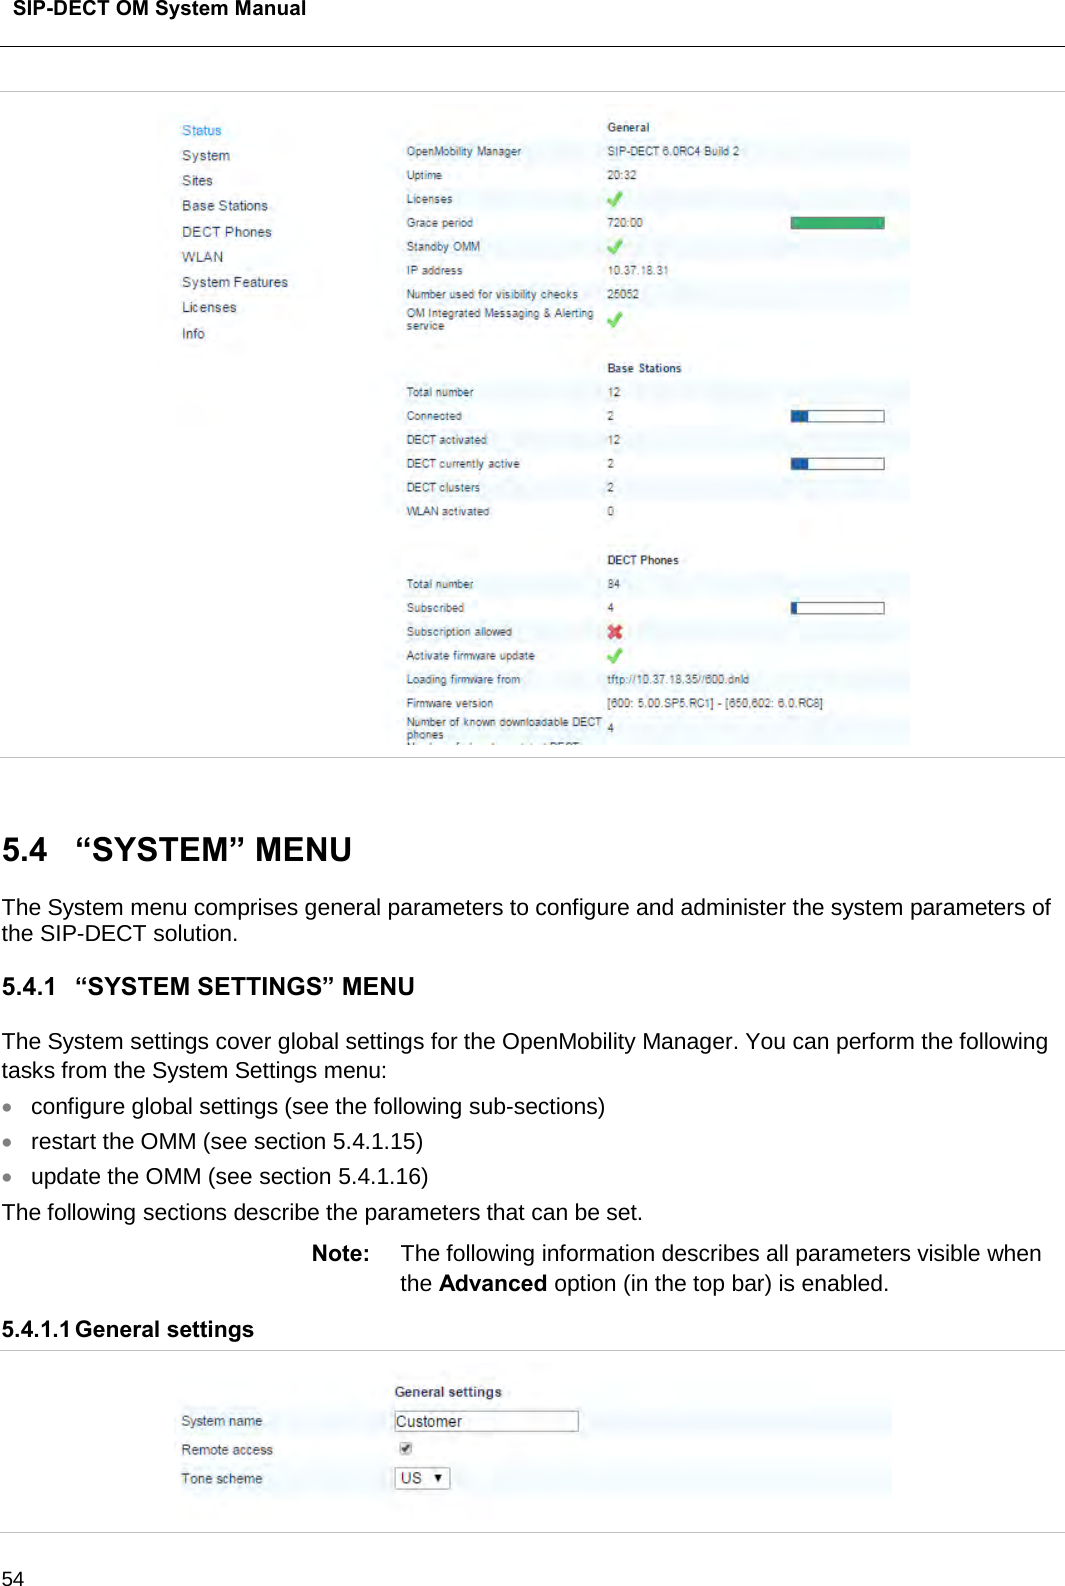  SIP-DECT OM System Manual    54   5.4  “SYSTEM” MENU The System menu comprises general parameters to configure and administer the system parameters of the SIP-DECT solution. 5.4.1 “SYSTEM SETTINGS” MENU The System settings cover global settings for the OpenMobility Manager. You can perform the following tasks from the System Settings menu: • configure global settings (see the following sub-sections) • restart the OMM (see section 5.4.1.15) • update the OMM (see section 5.4.1.16) The following sections describe the parameters that can be set. Note: The following information describes all parameters visible when the Advanced option (in the top bar) is enabled. 5.4.1.1 General settings  